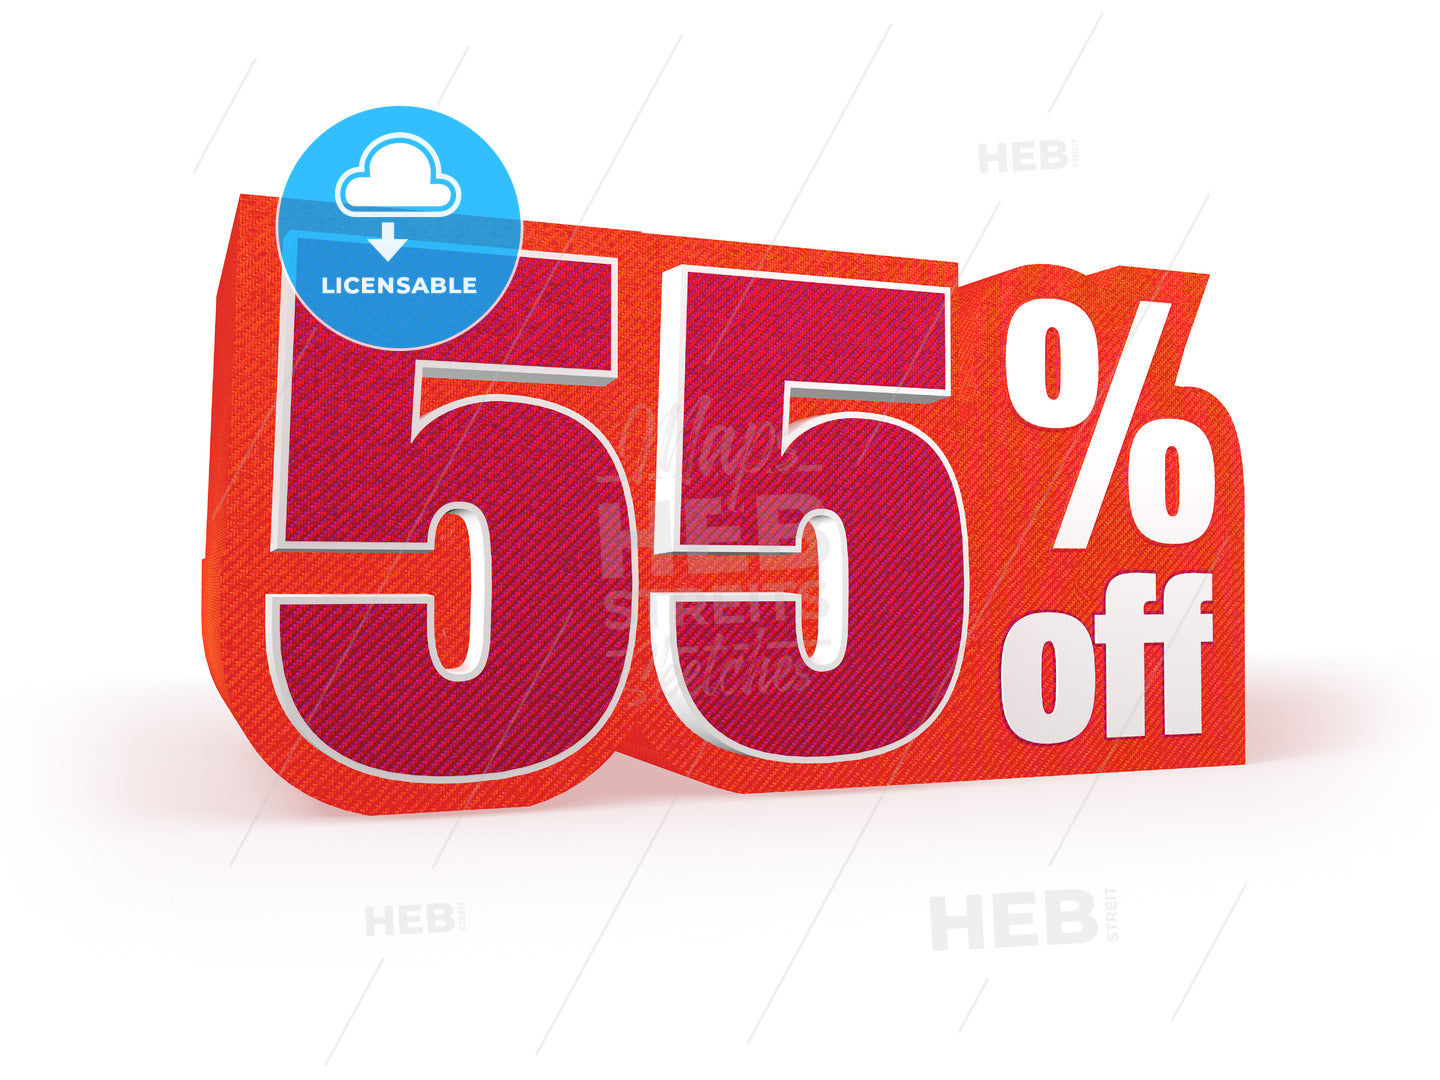 55 percent off red wool styled discount price sign – instant download